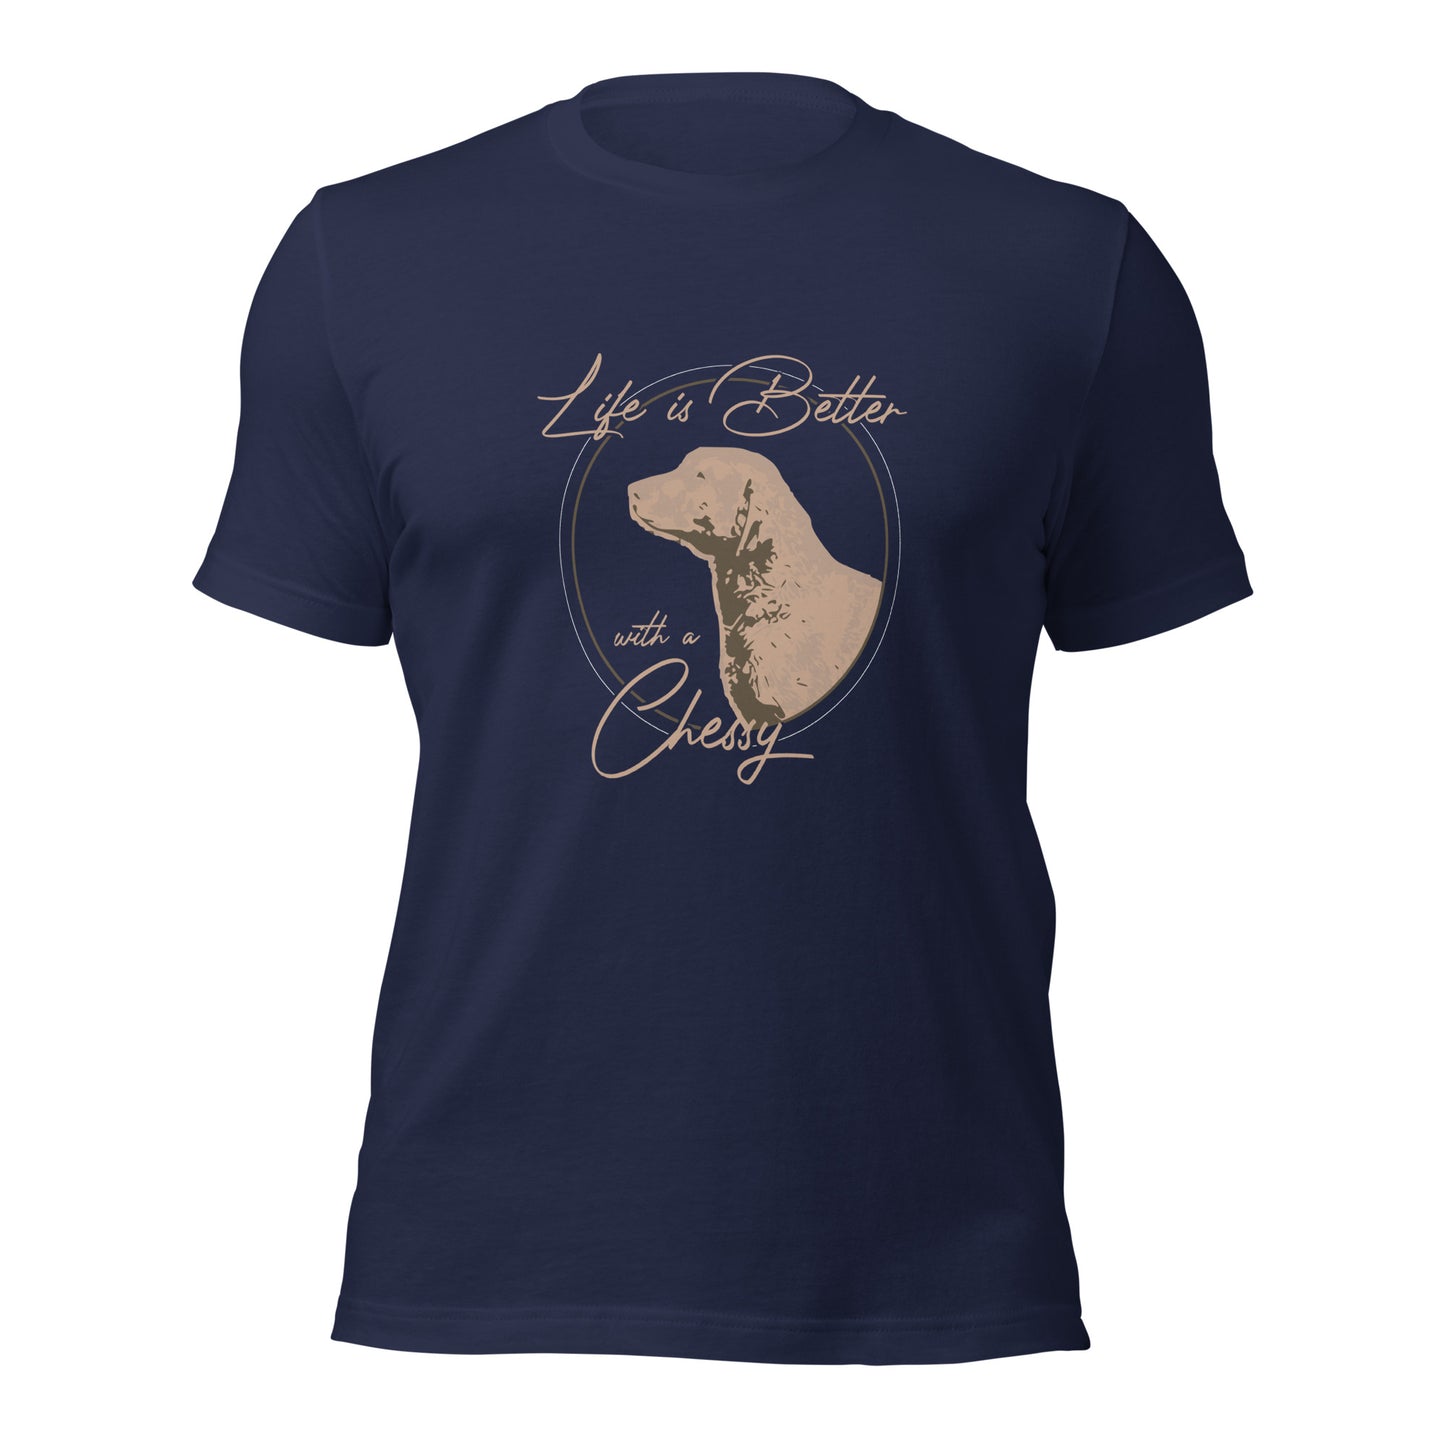 LIFE IS BETER WITH A CHESSY Unisex t-shirt